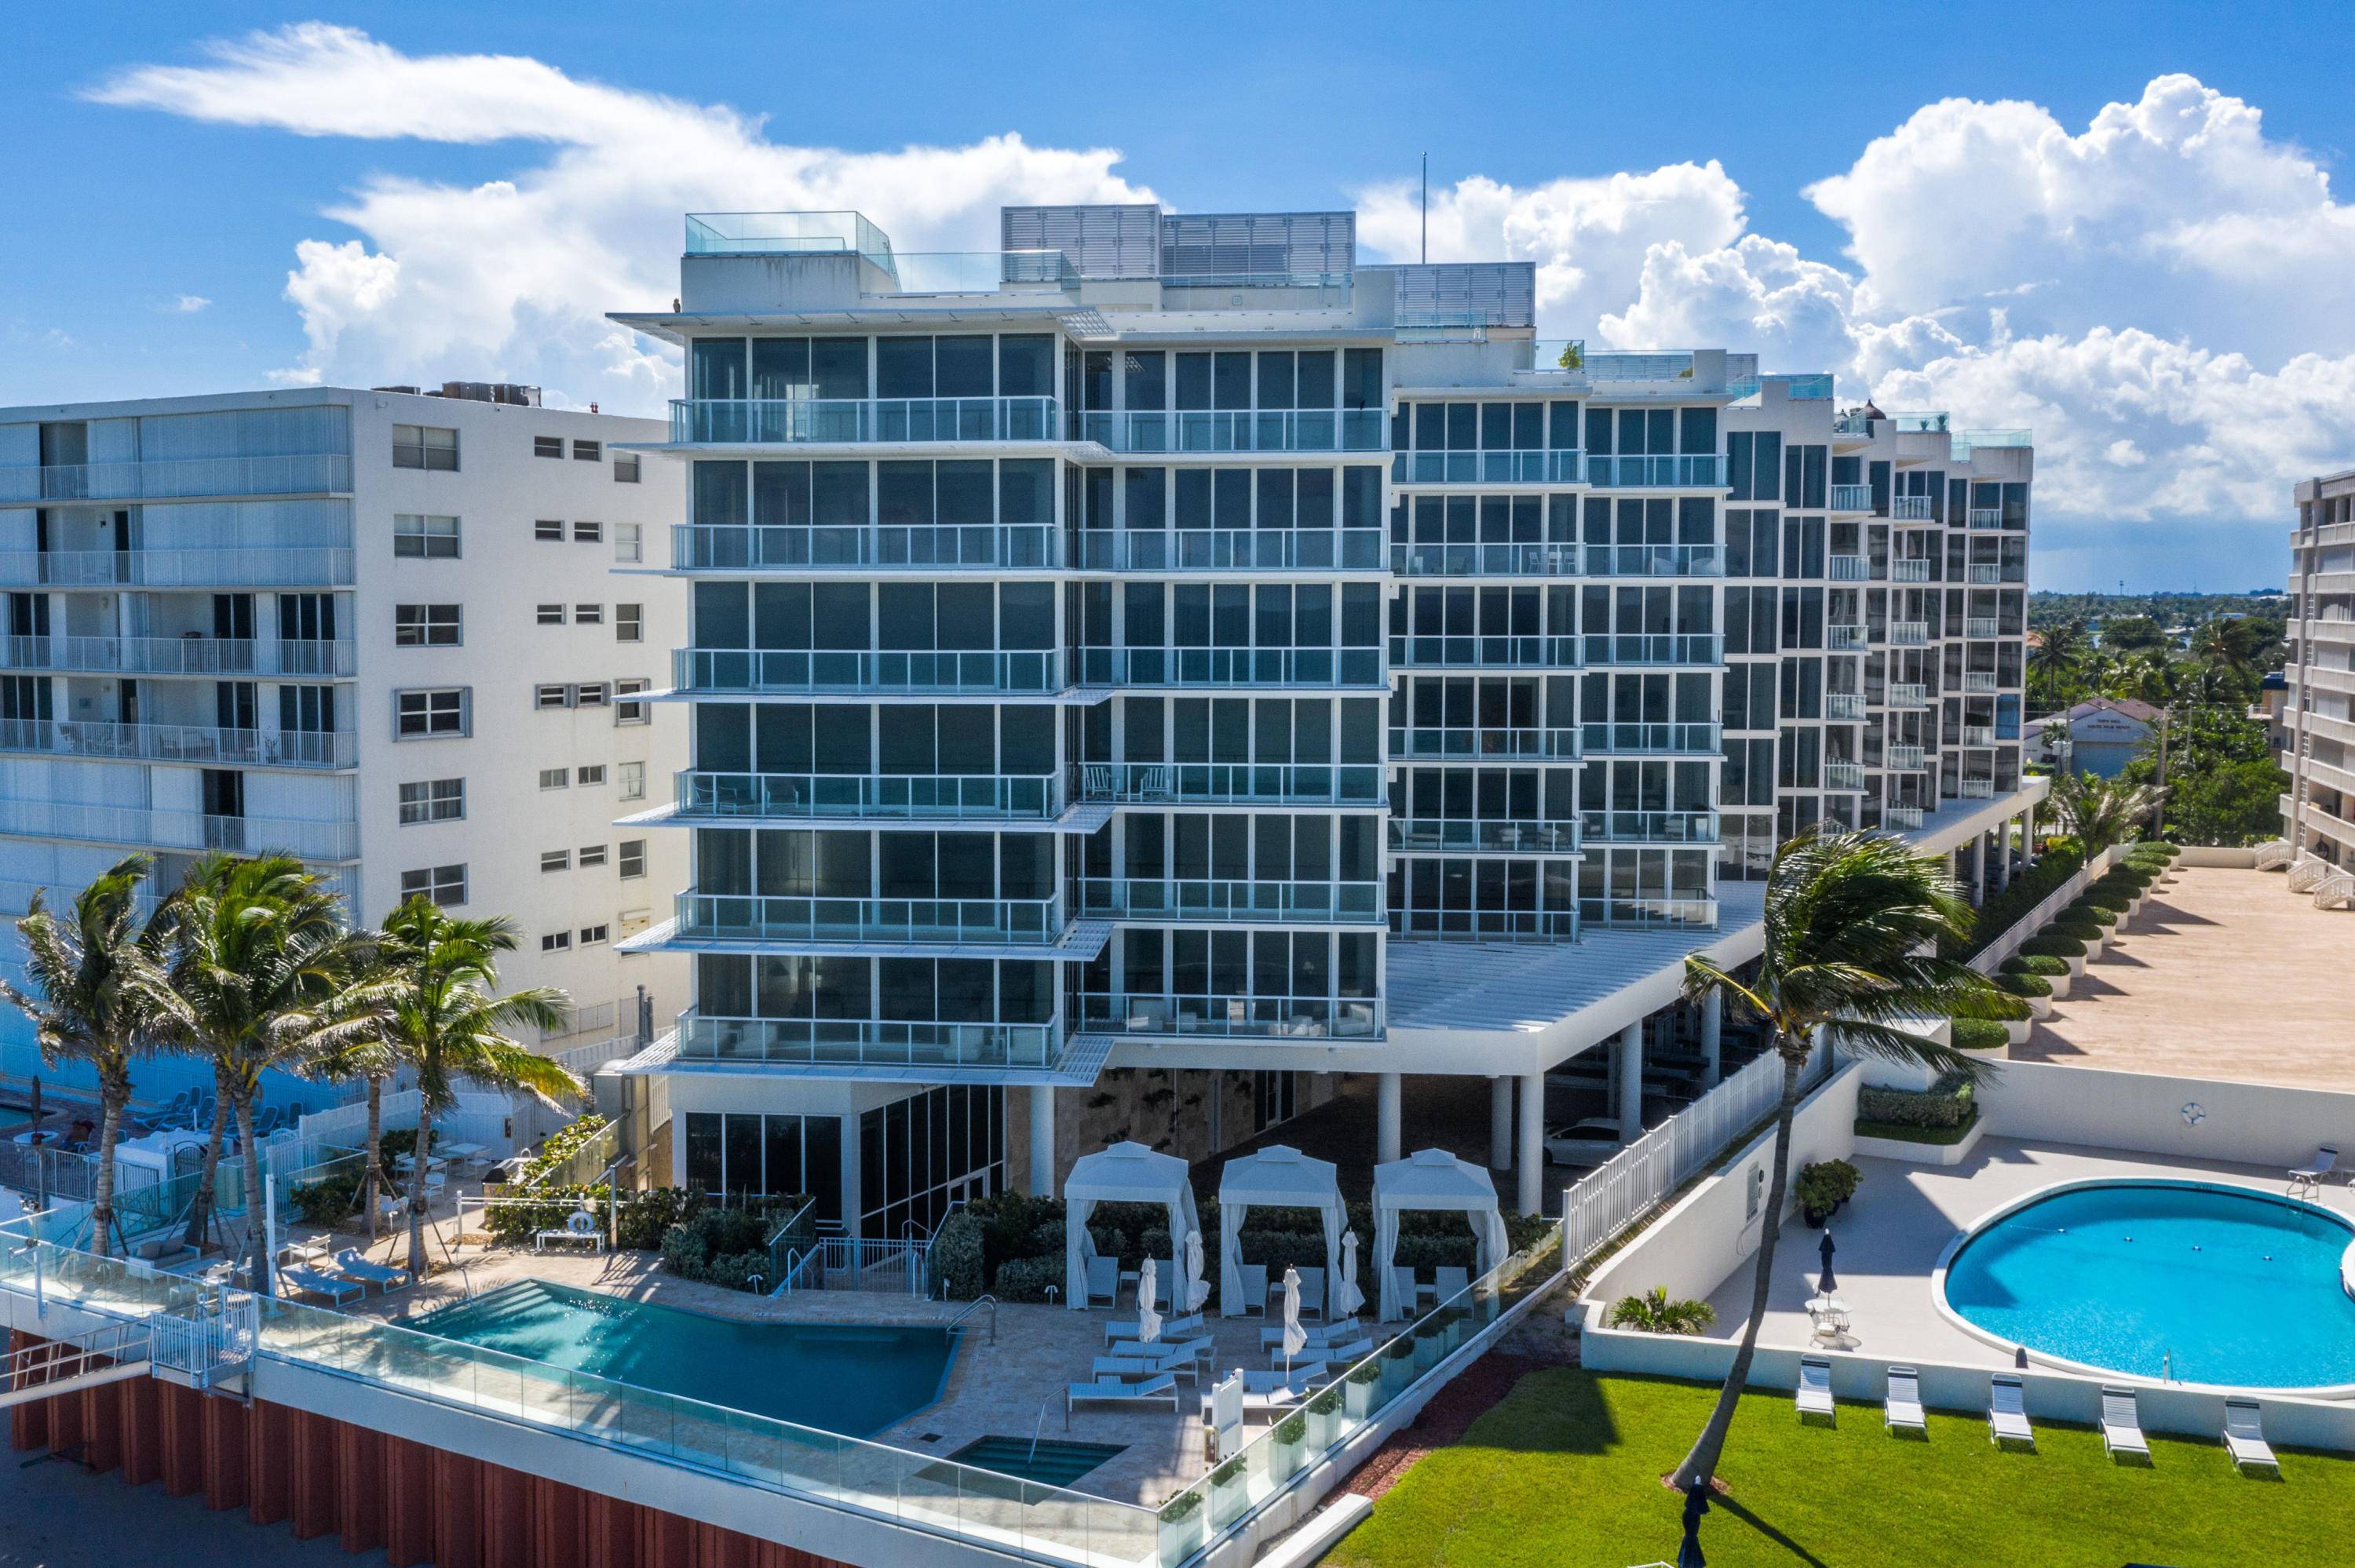 3550 South Ocean is a NEW CONSTRUCTION Luxury Boutique building directly on the Ocean.